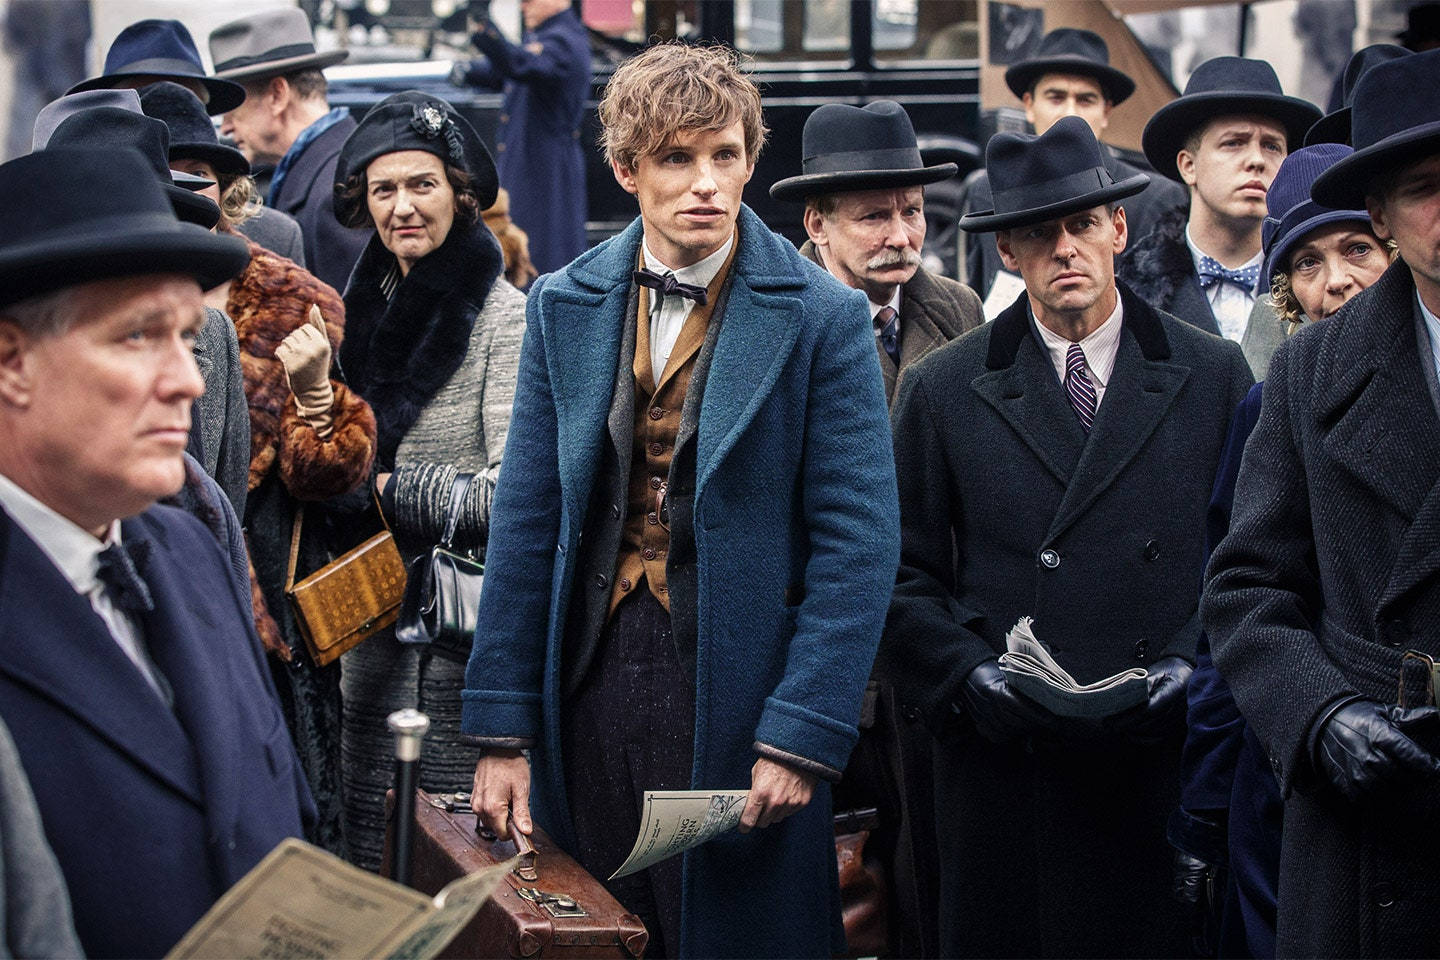 Fantastic Beasts And Where To Find Them Newt Scamander In A Crowd Wallpaper